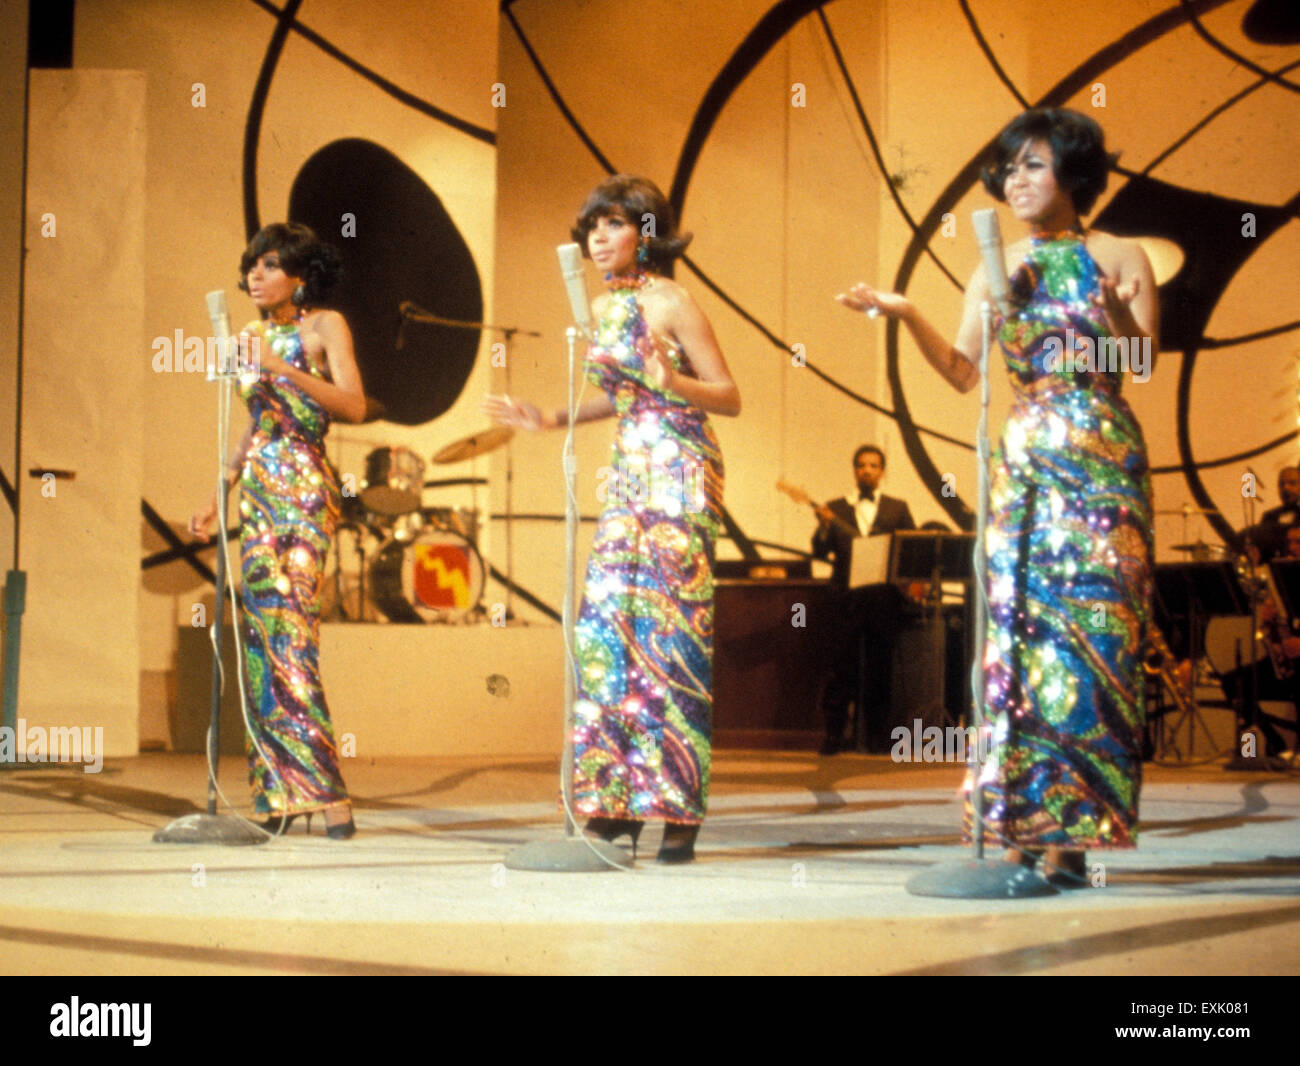 THE SUPREMES US vocal group about 1968. From left: Diaa Ross, Mary Wilson, Cindy Birdsong Stock Photo